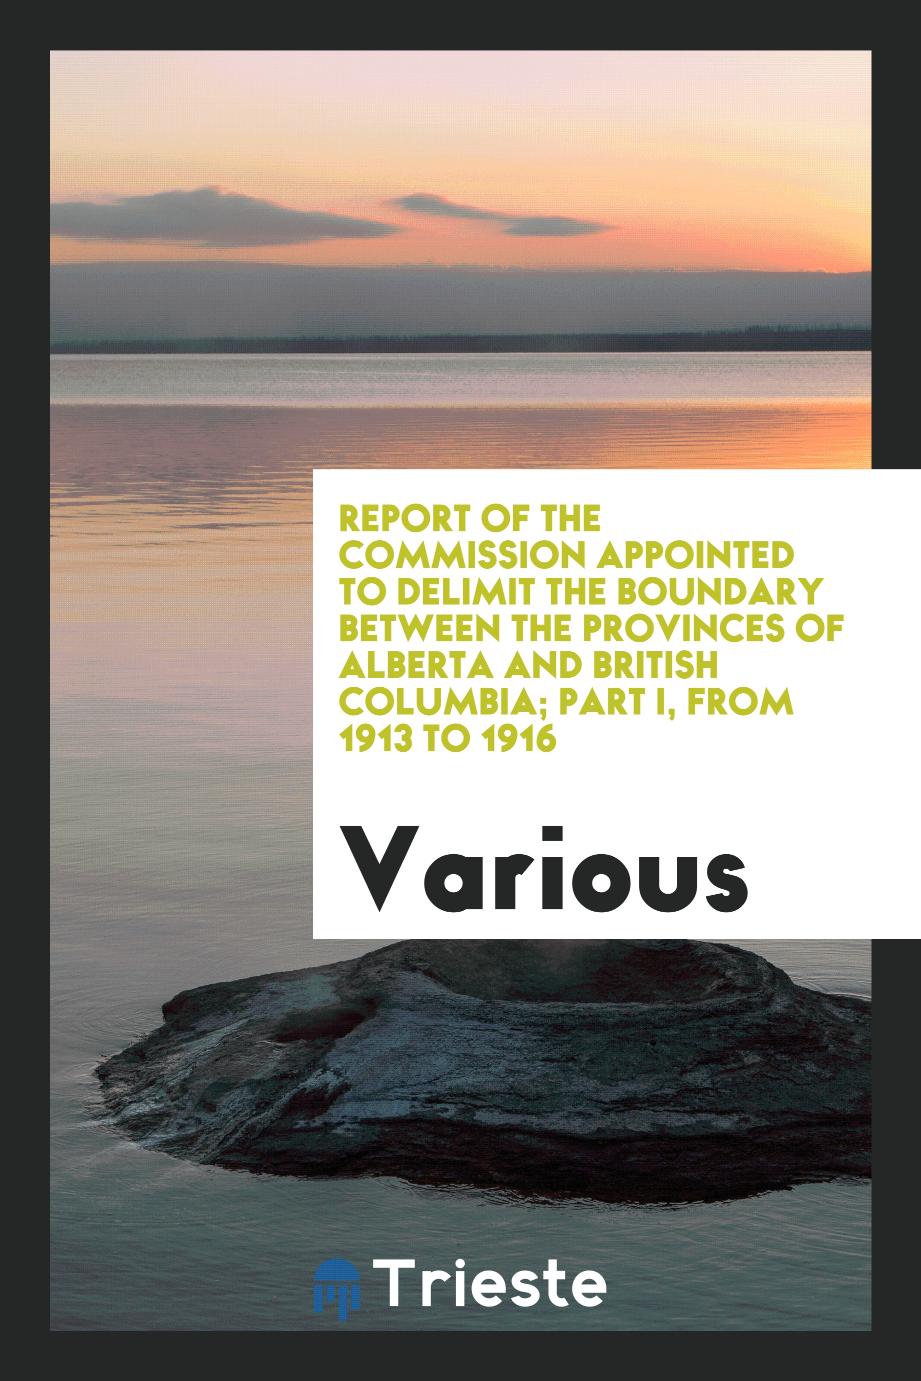 Report of the Commission appointed to delimit the boundary between the provinces of Alberta and British Columbia; Part I, from 1913 to 1916